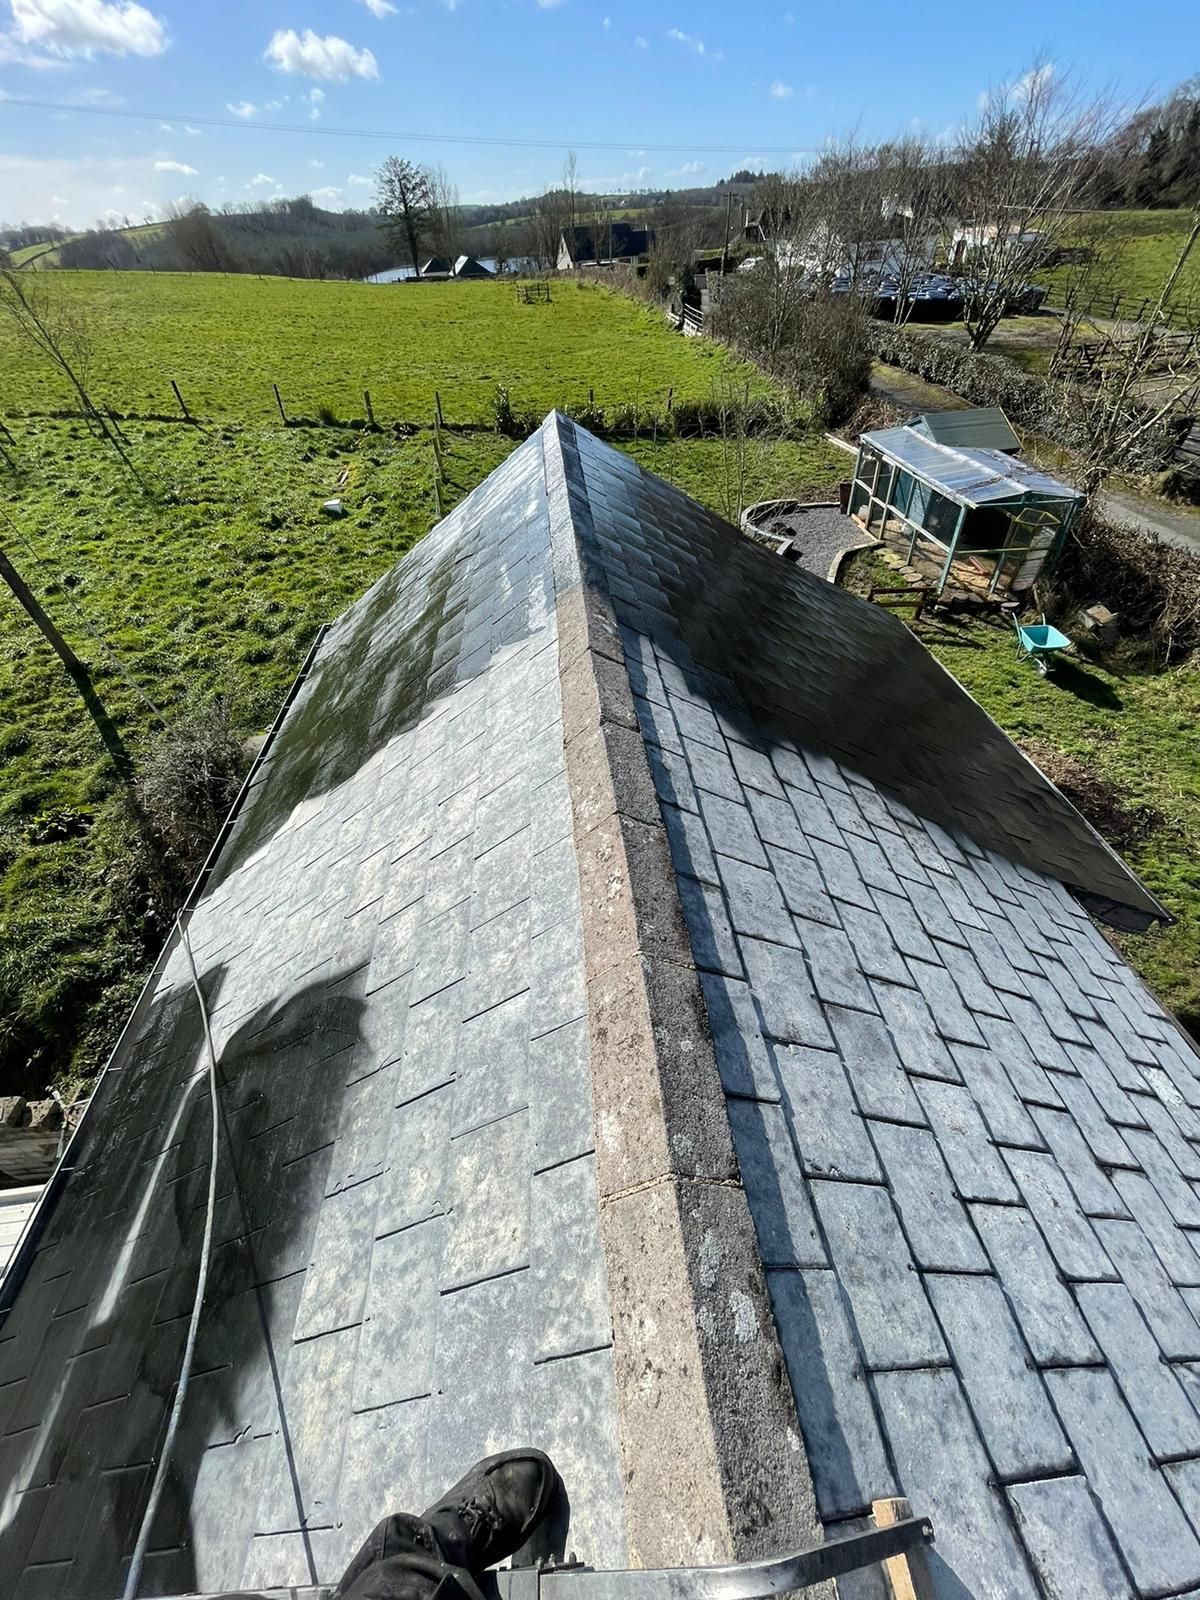 Roof Painting done in Ireland